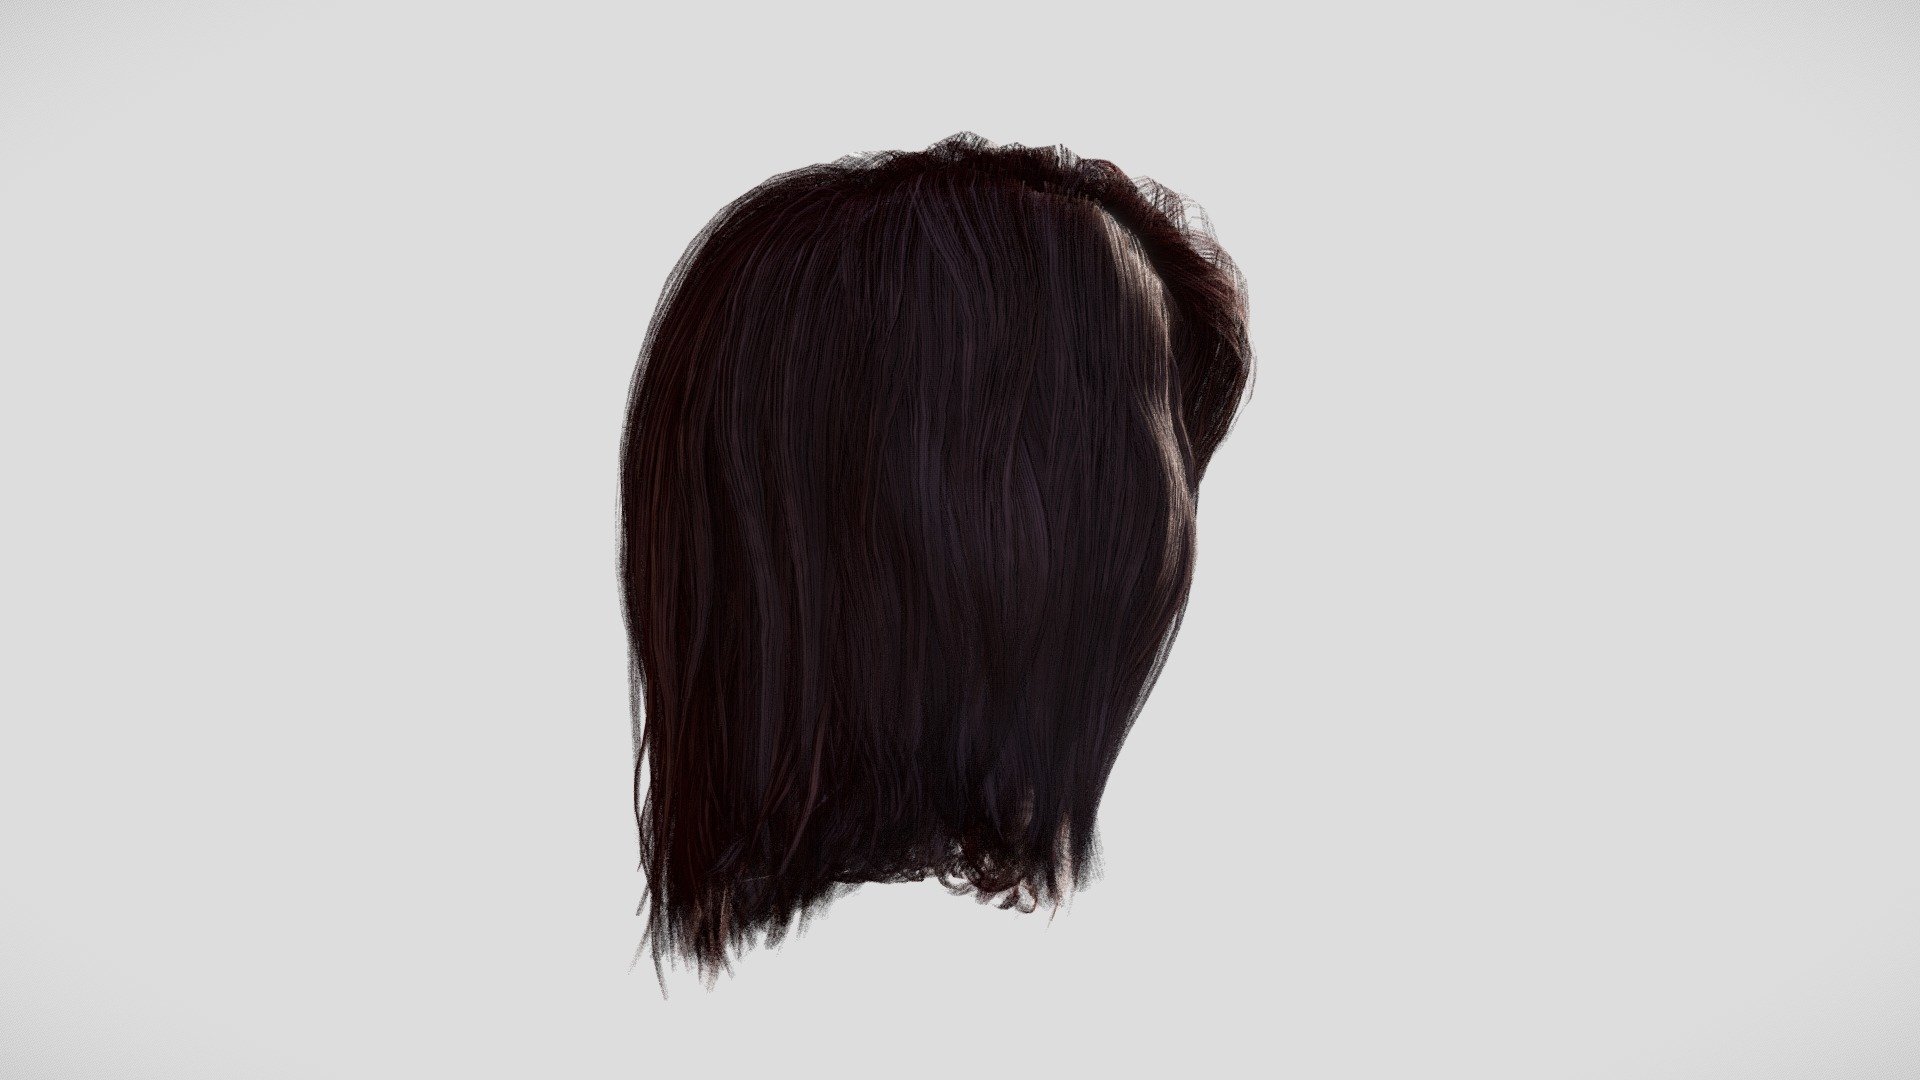 Hairstyle for your 3d character!

GEOMETRY:
The haircut is made with quad polygon geometry, a.k.a hair cards. The hair geometry is meticulously constructed with a single edge flowing through the center for easy rigging and intuitive spline manipulation.

TEXTURES:(4096x4096):
    o - used to simulate Ambient Occlusion effect
    z - used to simulate Unreal's Pixel Depth Offset effect
    flow - used to control the direction of reflection normal
    id - used for cross-strand color variation
    op - used to manipulate opacity or alpha
    root - used for gradual root coloring along the flow of the strand
    base - Base texture

The textures are compatible with the new Smart Hair system within Reallusion Character Creator, which is made to be used with both UnrealEngine and Unity.

EXTRA:
The hairstyle also includes the scalp geometry and textures to prevent the skin from peaking through the hair strands thus creating an unrealistic-looking hairstyle.

Happy characterizing!

**NOTES:
* Head not included - Hair Female - 016 - Buy Royalty Free 3D model by Scanlab Photogrammetry Inc. (@scanlabstudio) 3d model